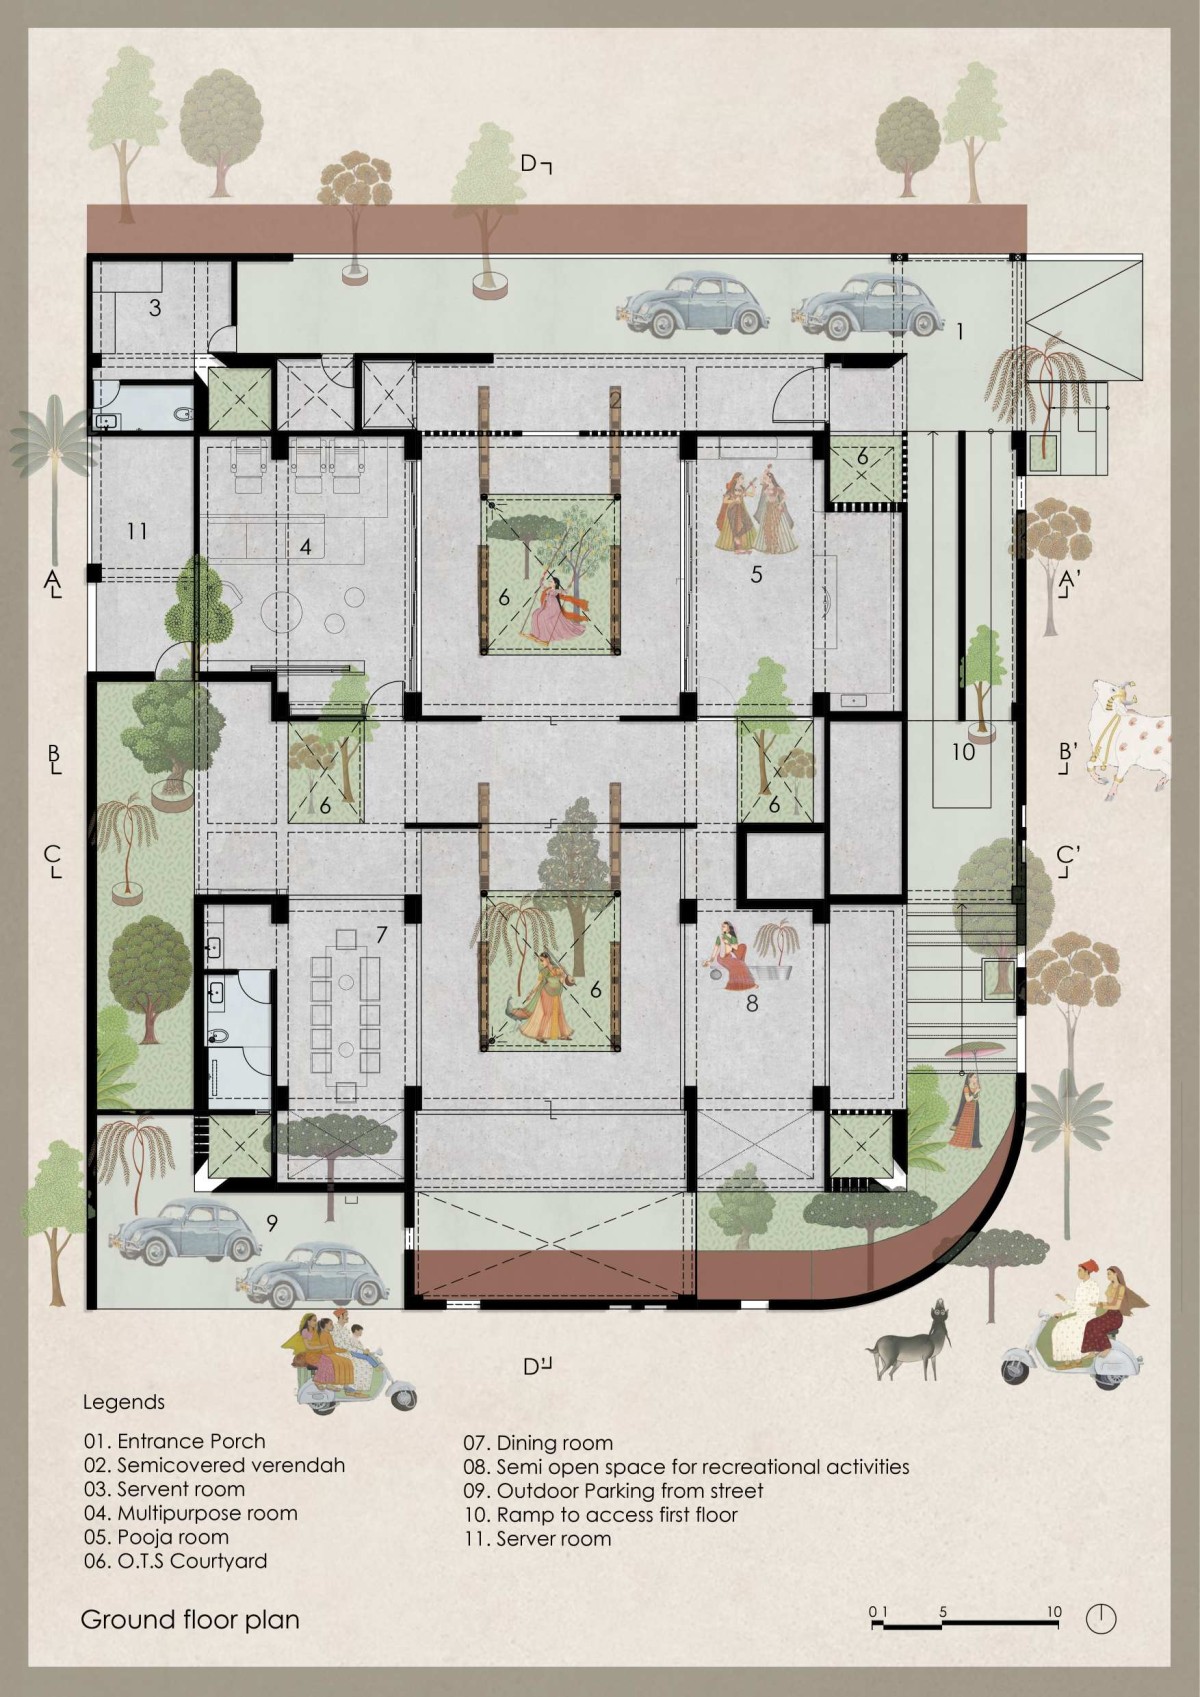 Ground floor plan of The Maze House by MISA Architects